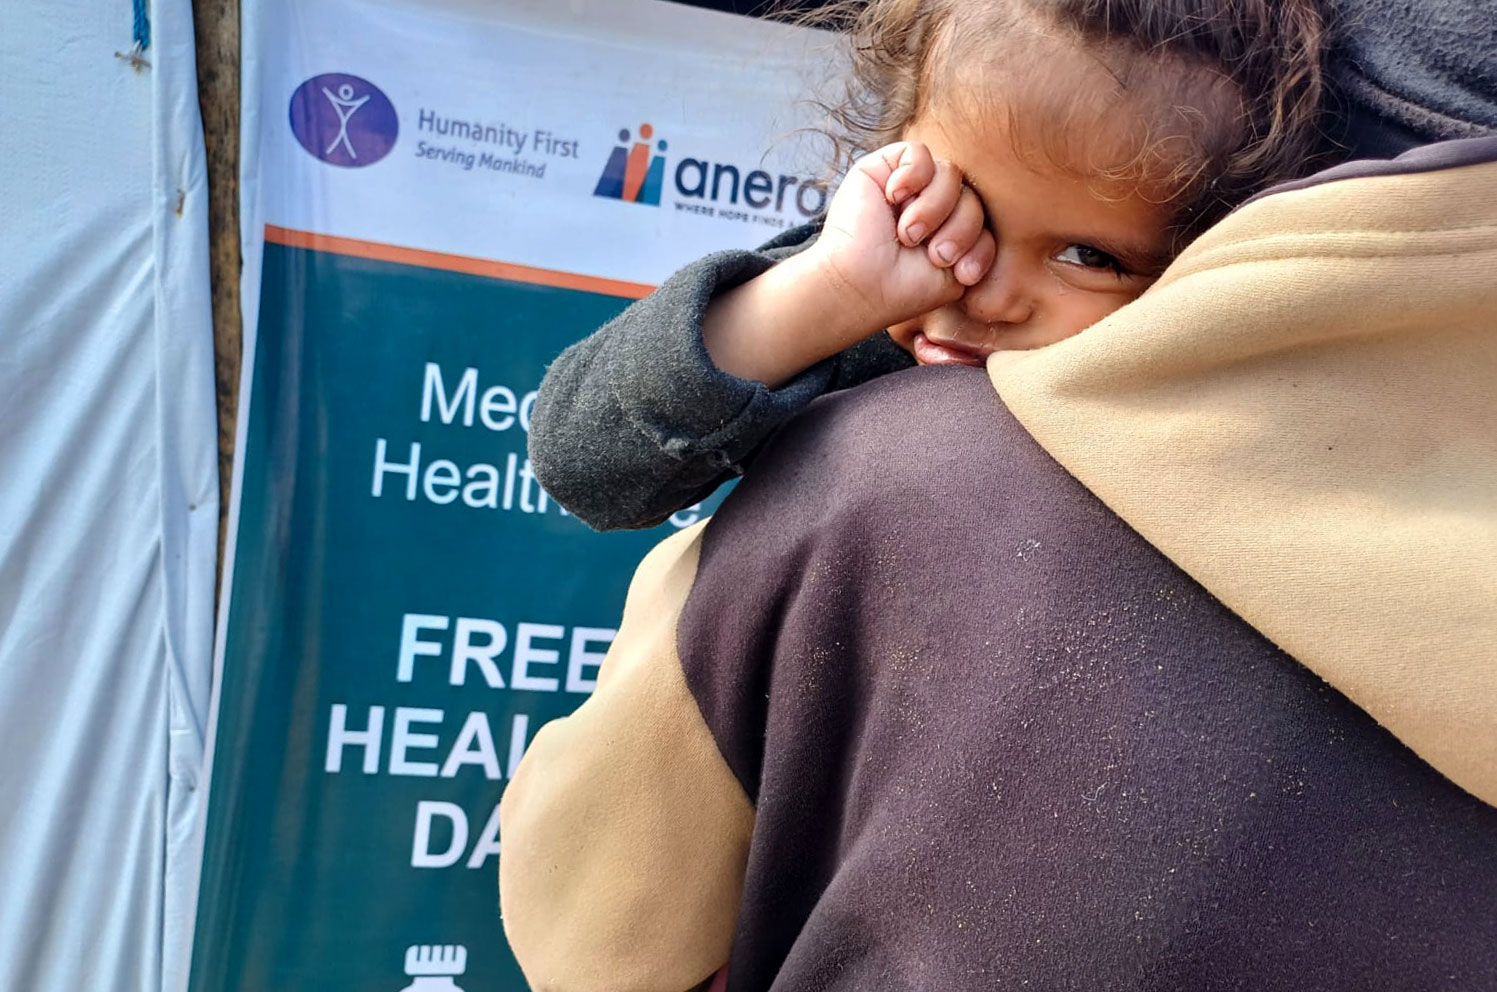 DR Gaza Anera Health Day 20240220 sleepy child in front of sign